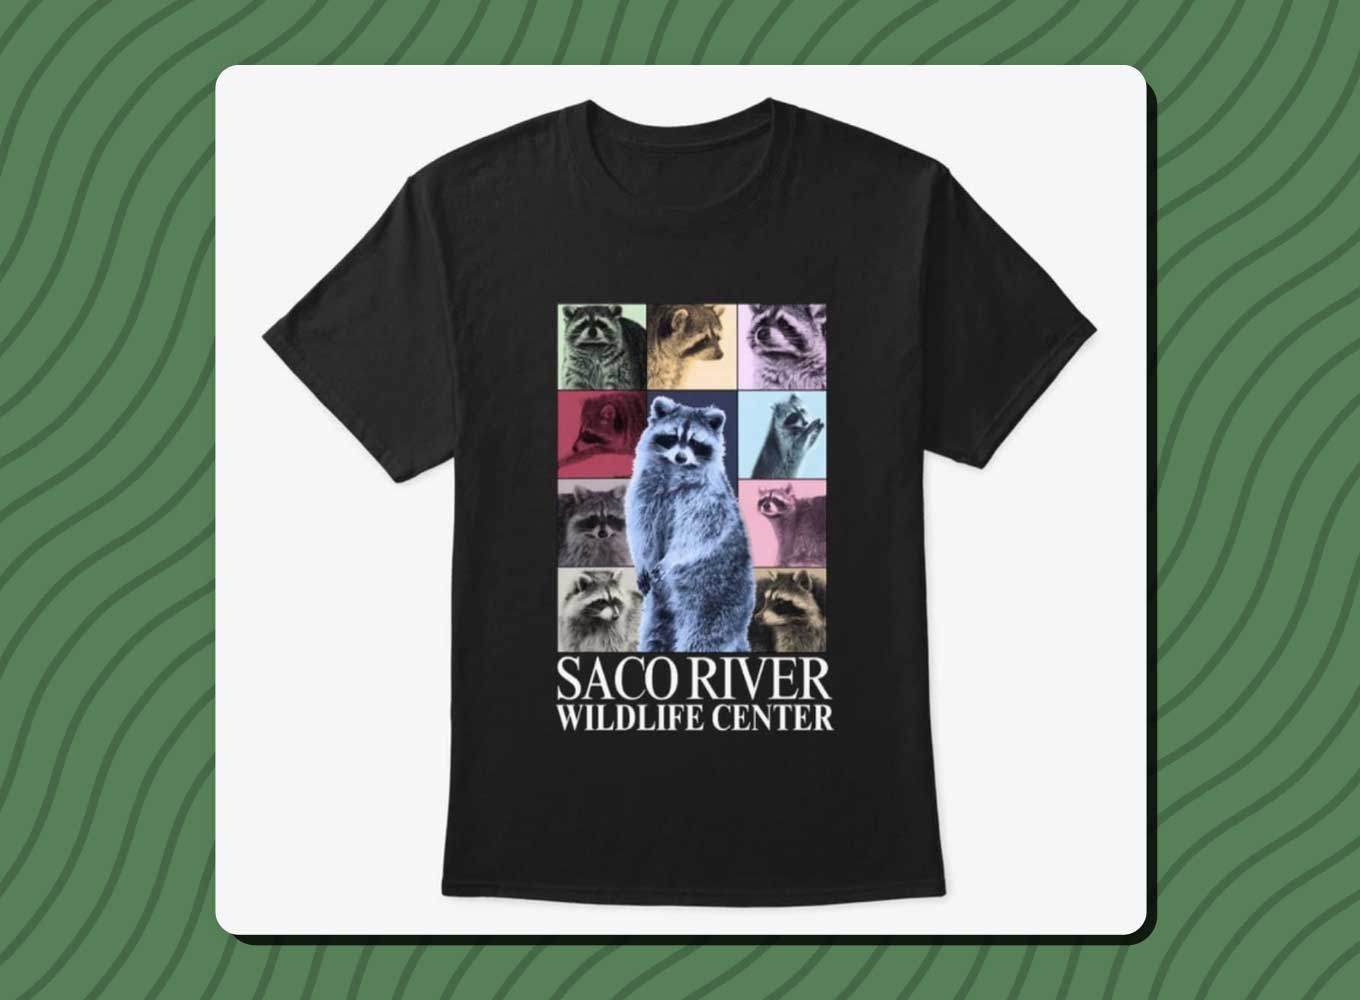 A black t-shirt with various raccoons on it. Saco River Wildlife Center